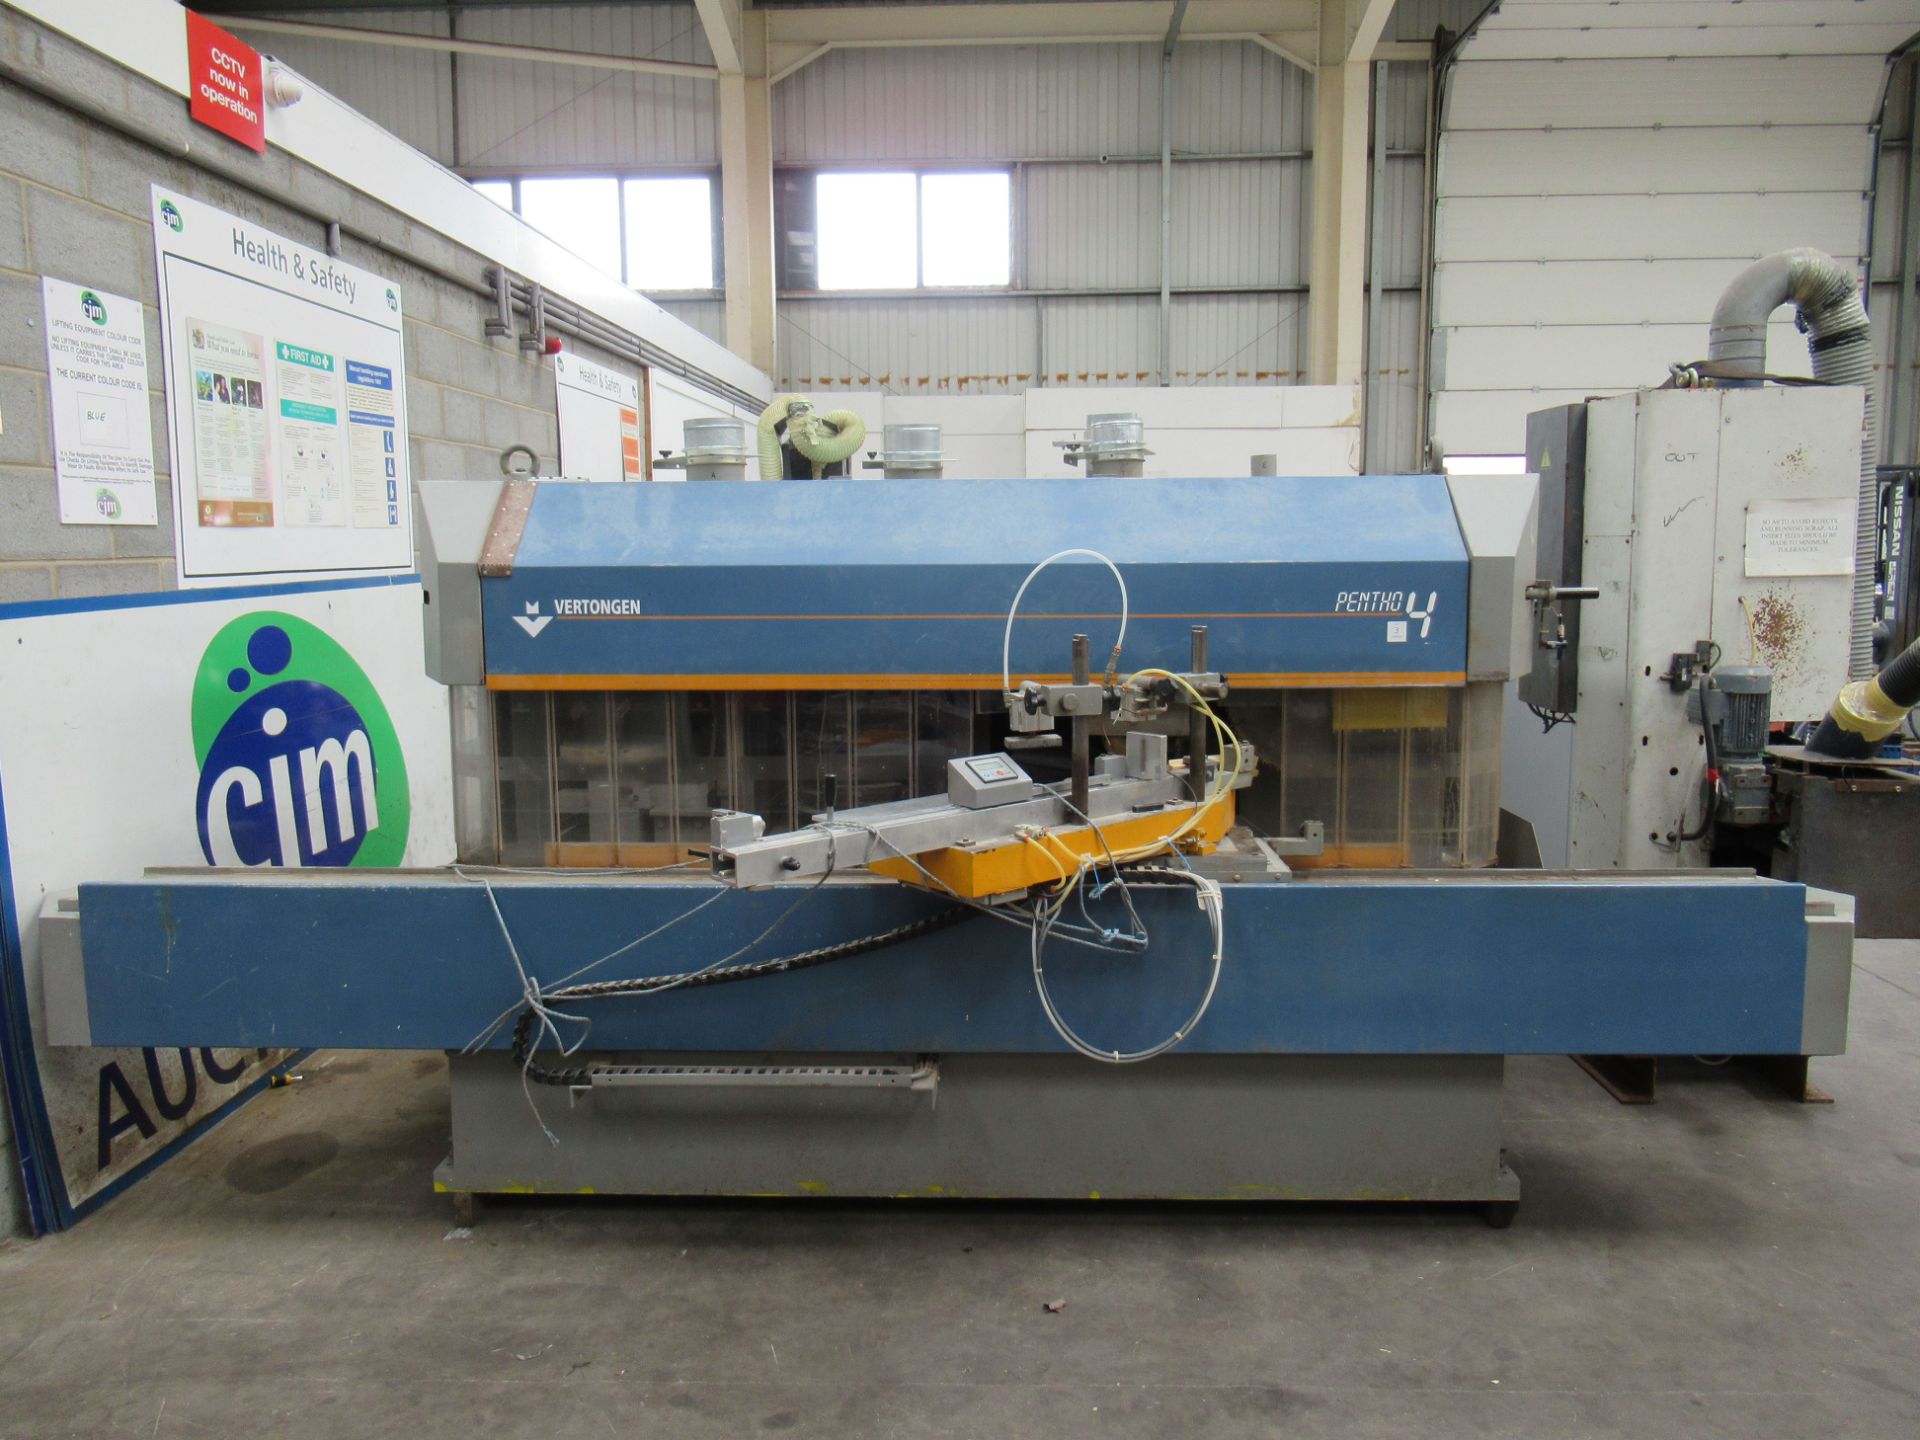 Vertongen Pentho4 Tenoning Machine together with a control panel.